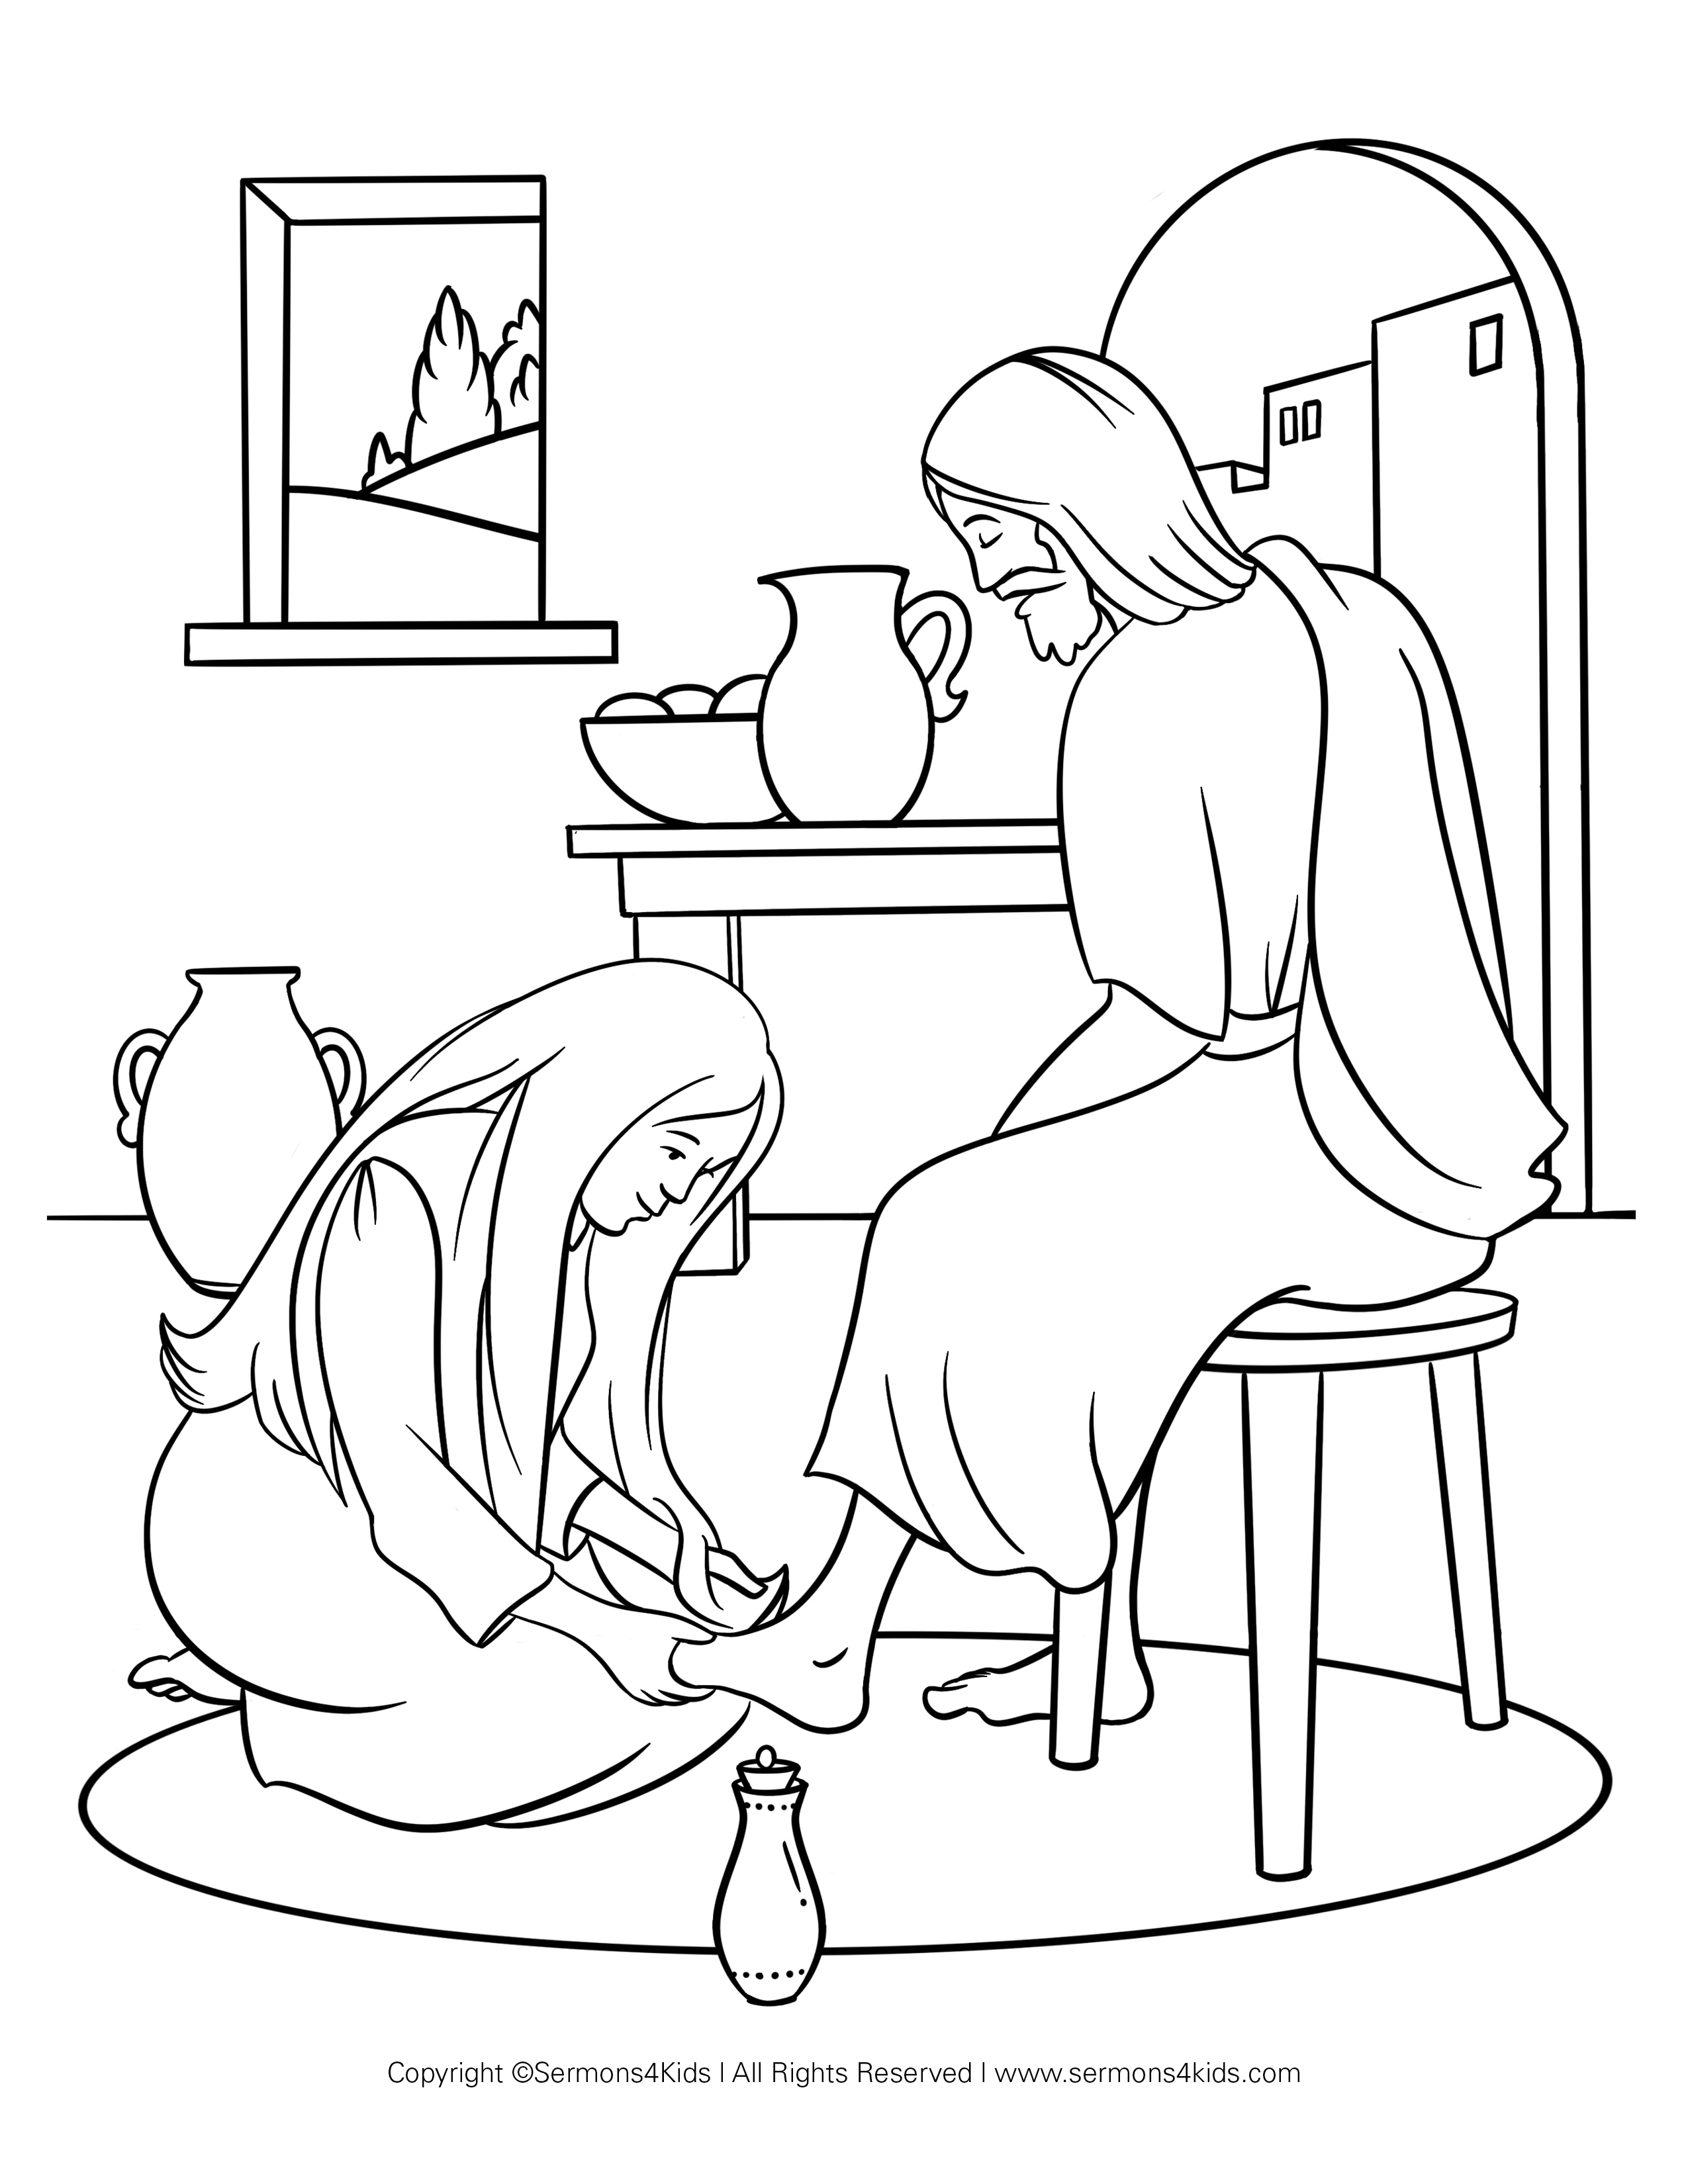 Mary Anoints the Feet of Jesus